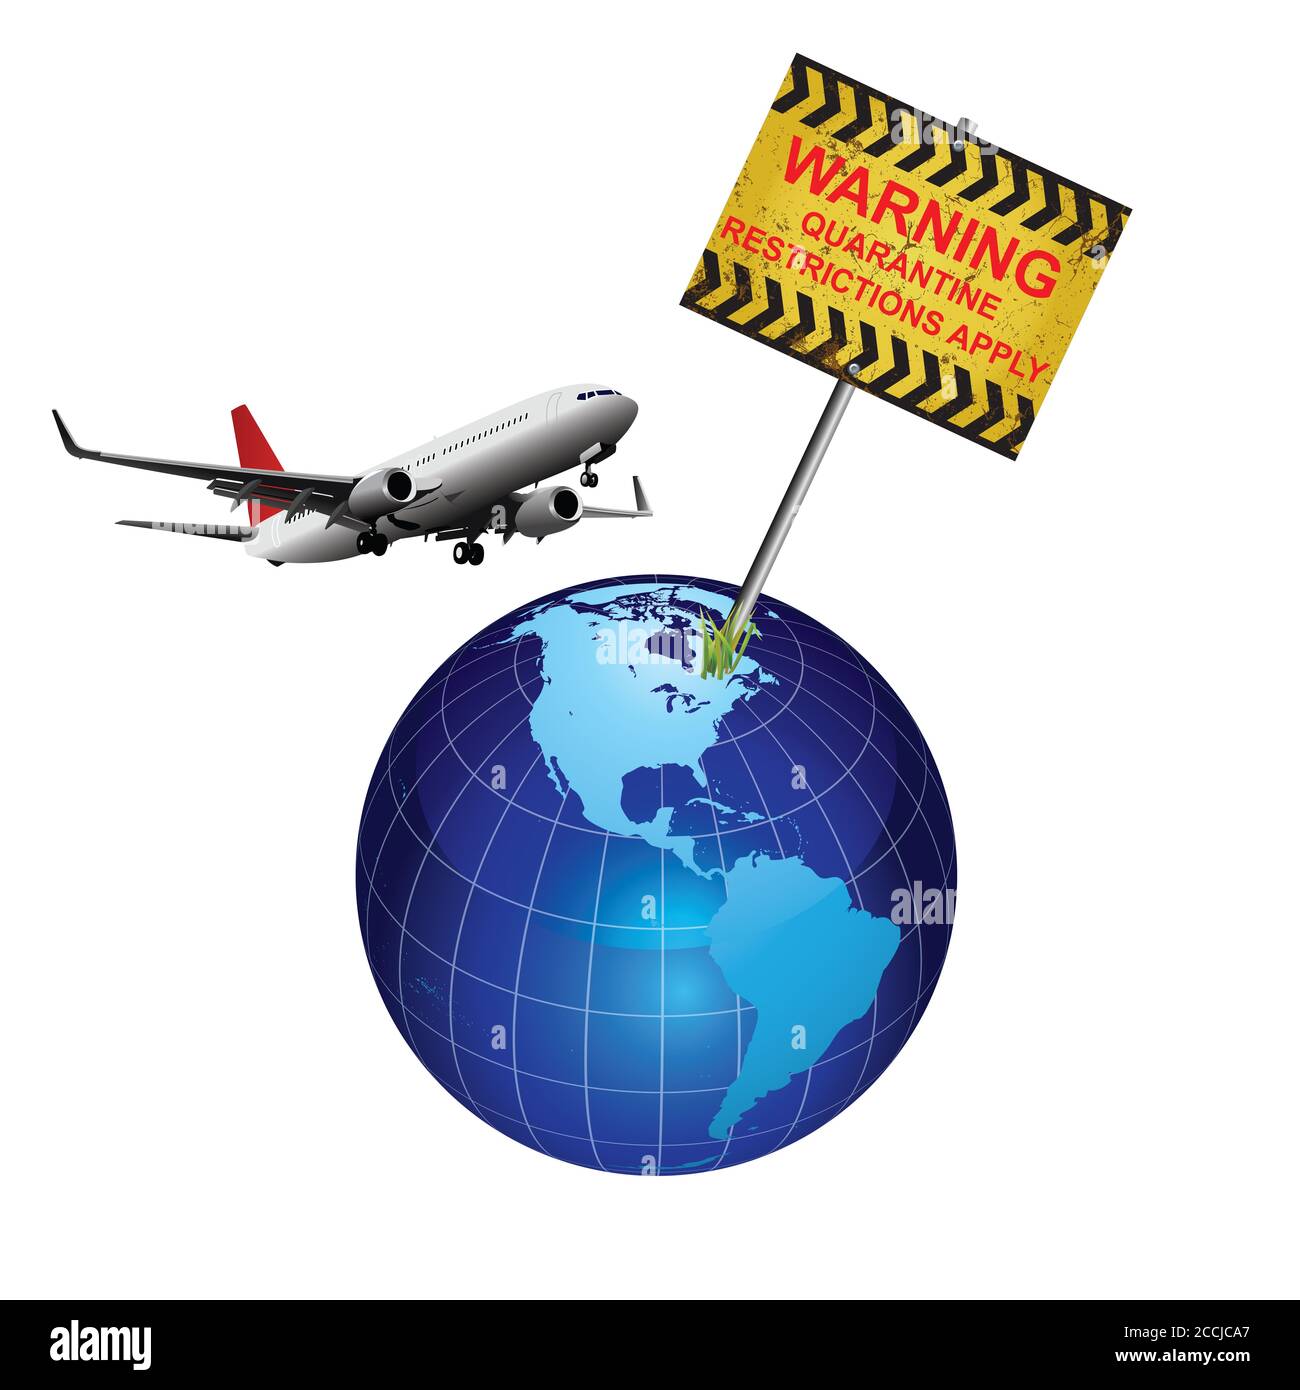 Warning quarantine restrictions apply sign relating to countries quarantining incoming international passenger arrivals due to the worldwide pandemic Stock Photo